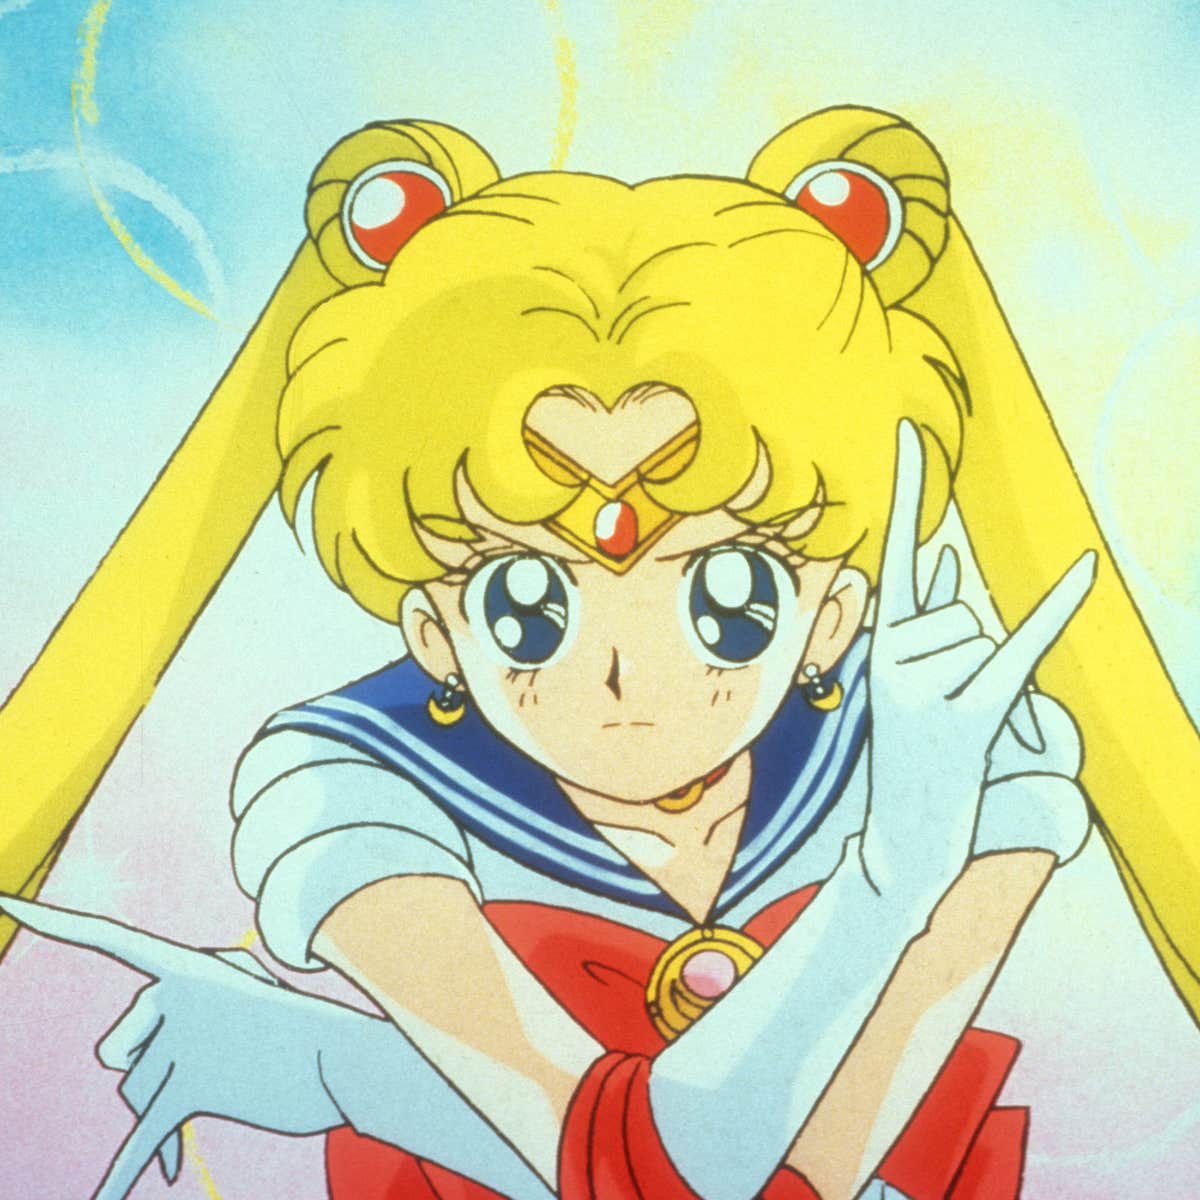 How To Watch Sailor Moon Episodes For Free On Youtube Pretty guardian sailor moon is a japanese tokusatsu television series based on the sailor moon manga created by naoko takeuchi. how to watch sailor moon episodes for